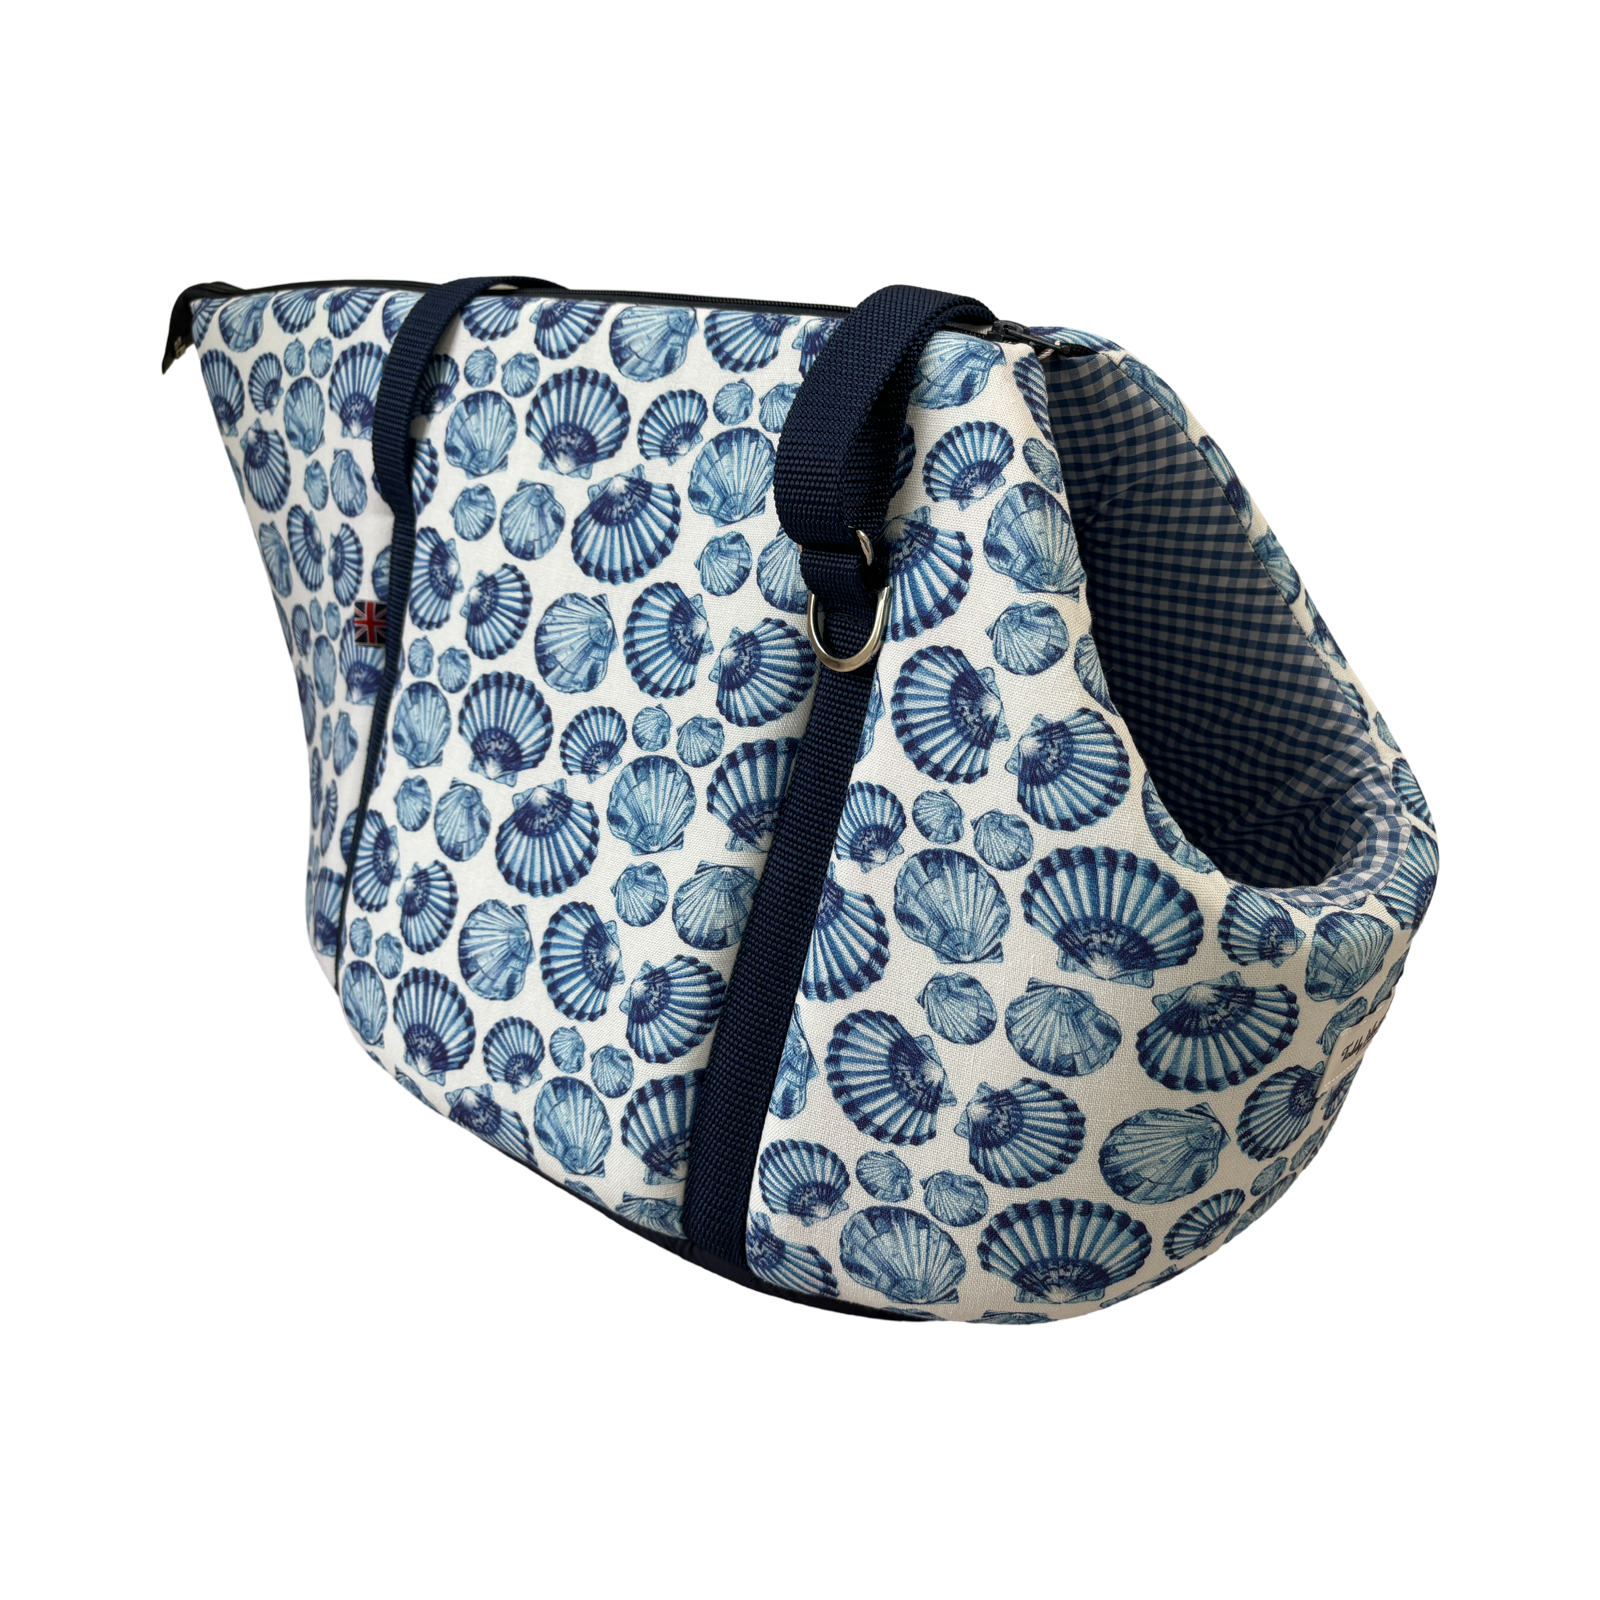 'The Cornwall' Seashells Dog Carrier - Limited Edition!